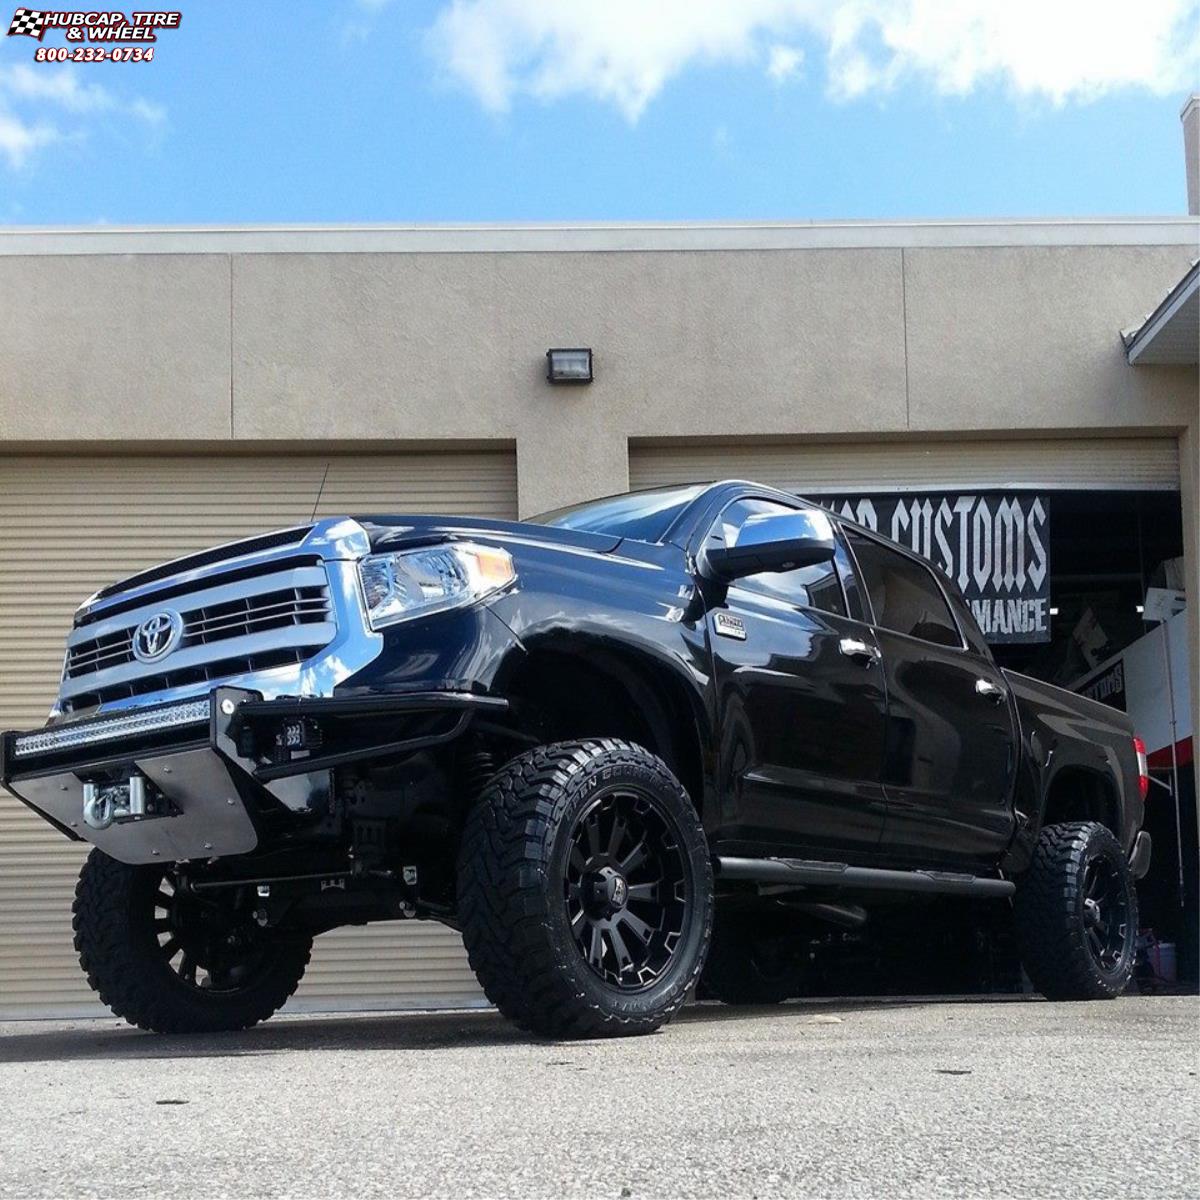 vehicle gallery/2016 toyota tundra xd series xd800 misfit  Matte Black wheels and rims